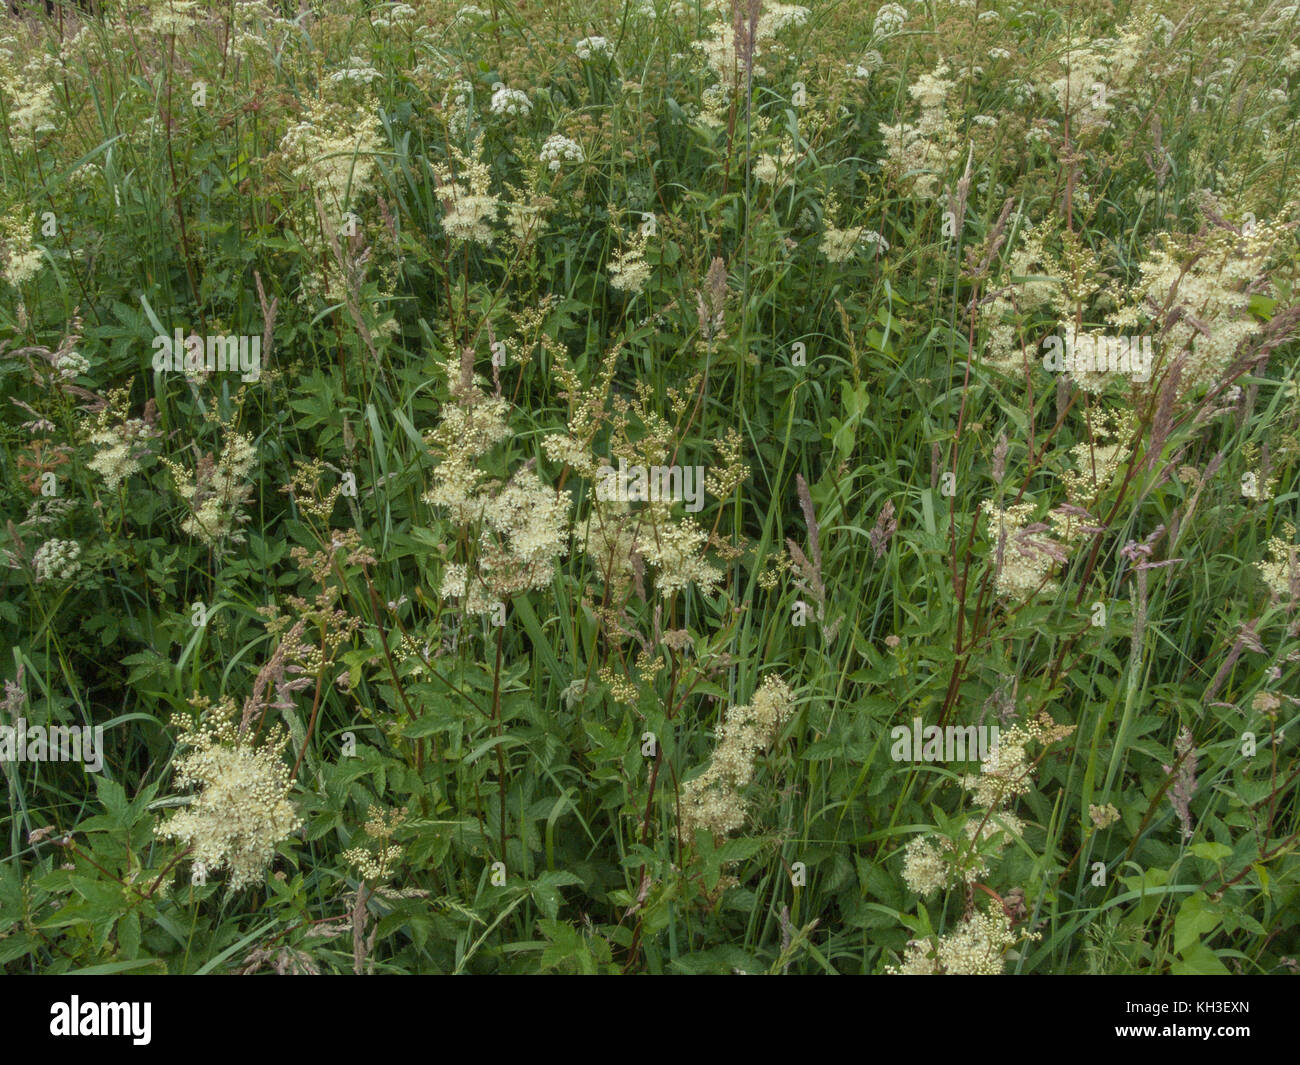 Flower masses of Meadowsweet / Filipendula ulmaria. A medicinal plant once used in herbal medicine and herbal remedies for its analgesic properties. Stock Photo